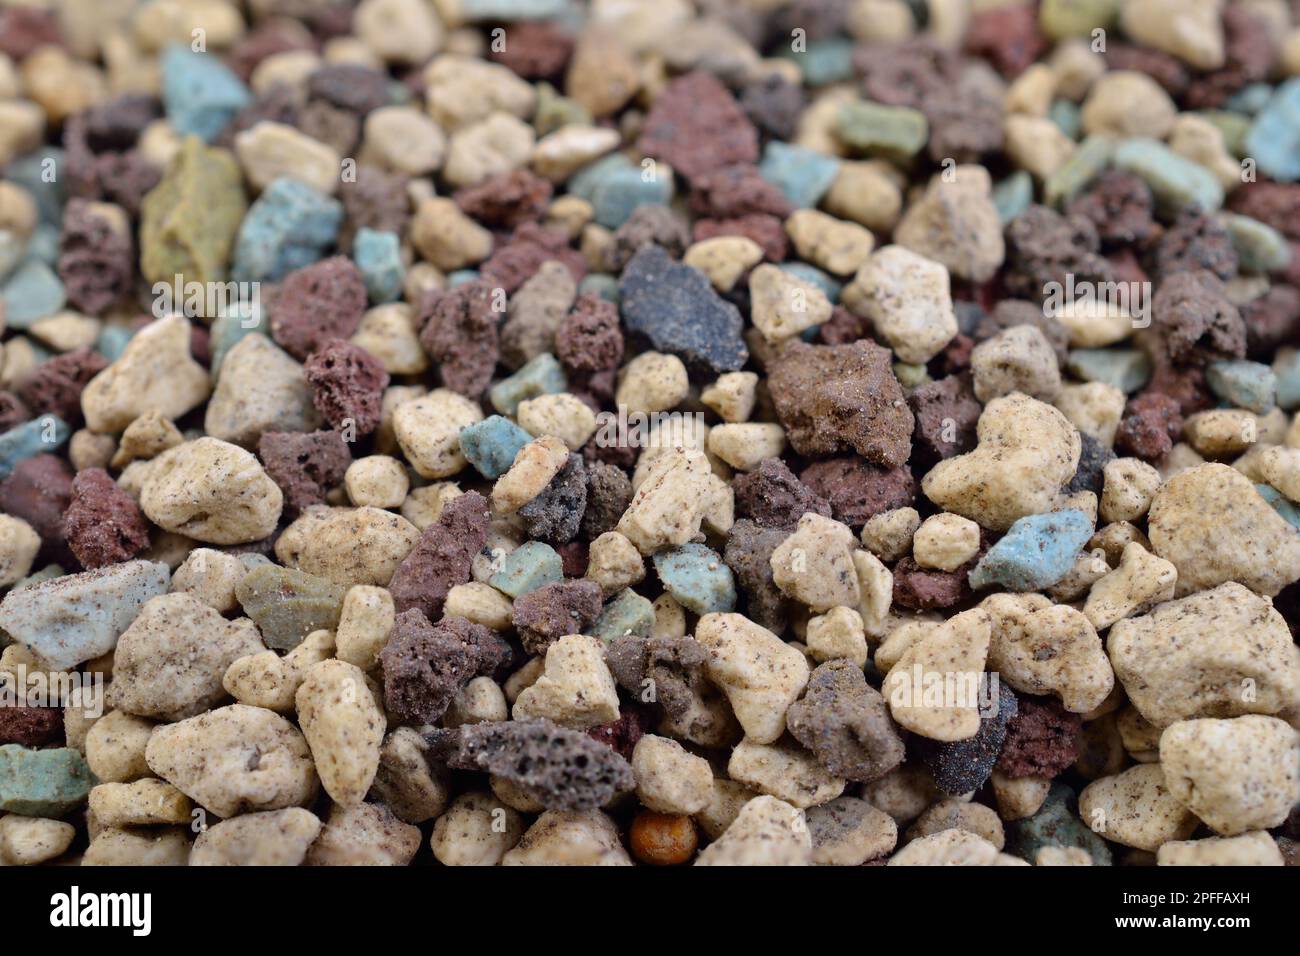 Lechuza substrate. It is a mix minerals for grow plants. Stock Photo